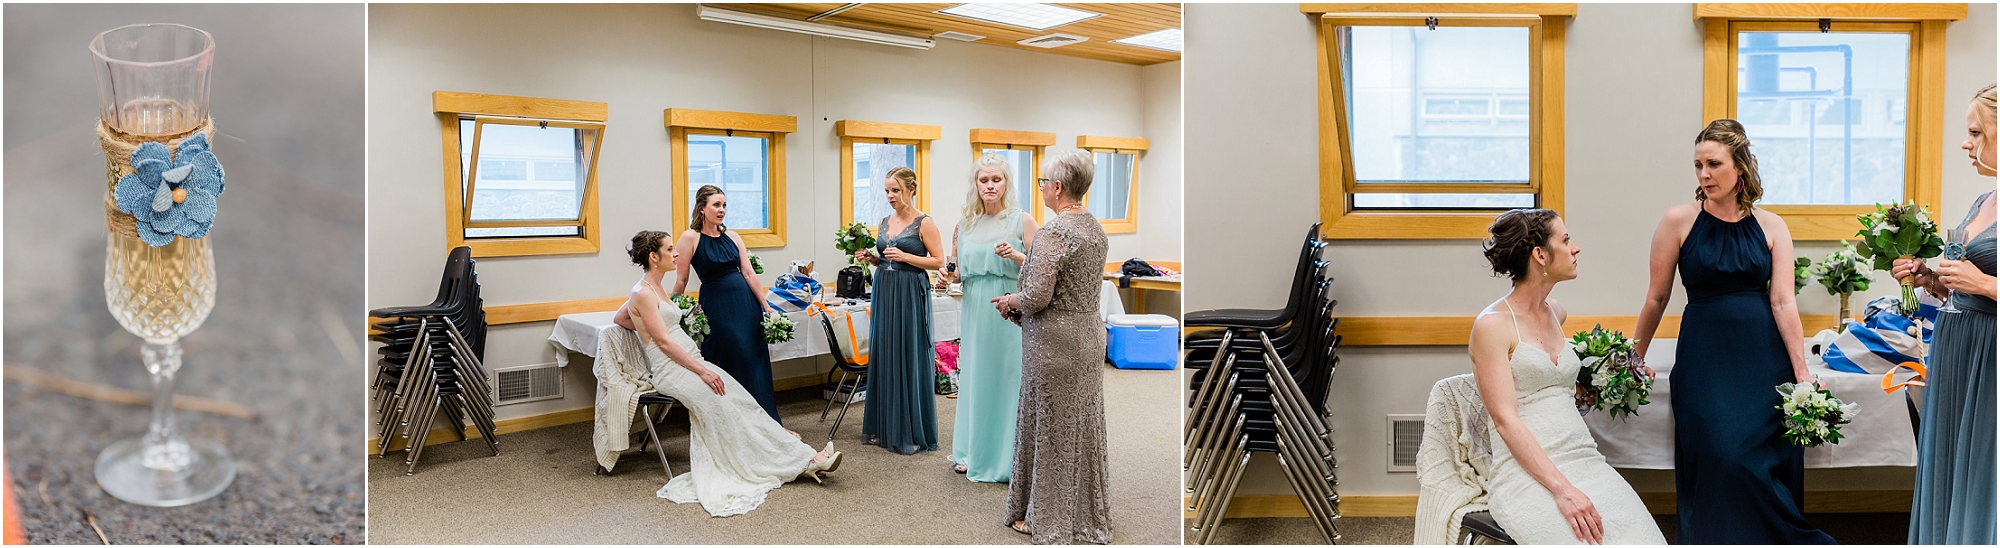 The bride relaxes with her mom and bridesmaids in the classroom serving as her getting ready room at Bend Oregon's wedding venue The High Desert Museum. | Erica Swantek Photography